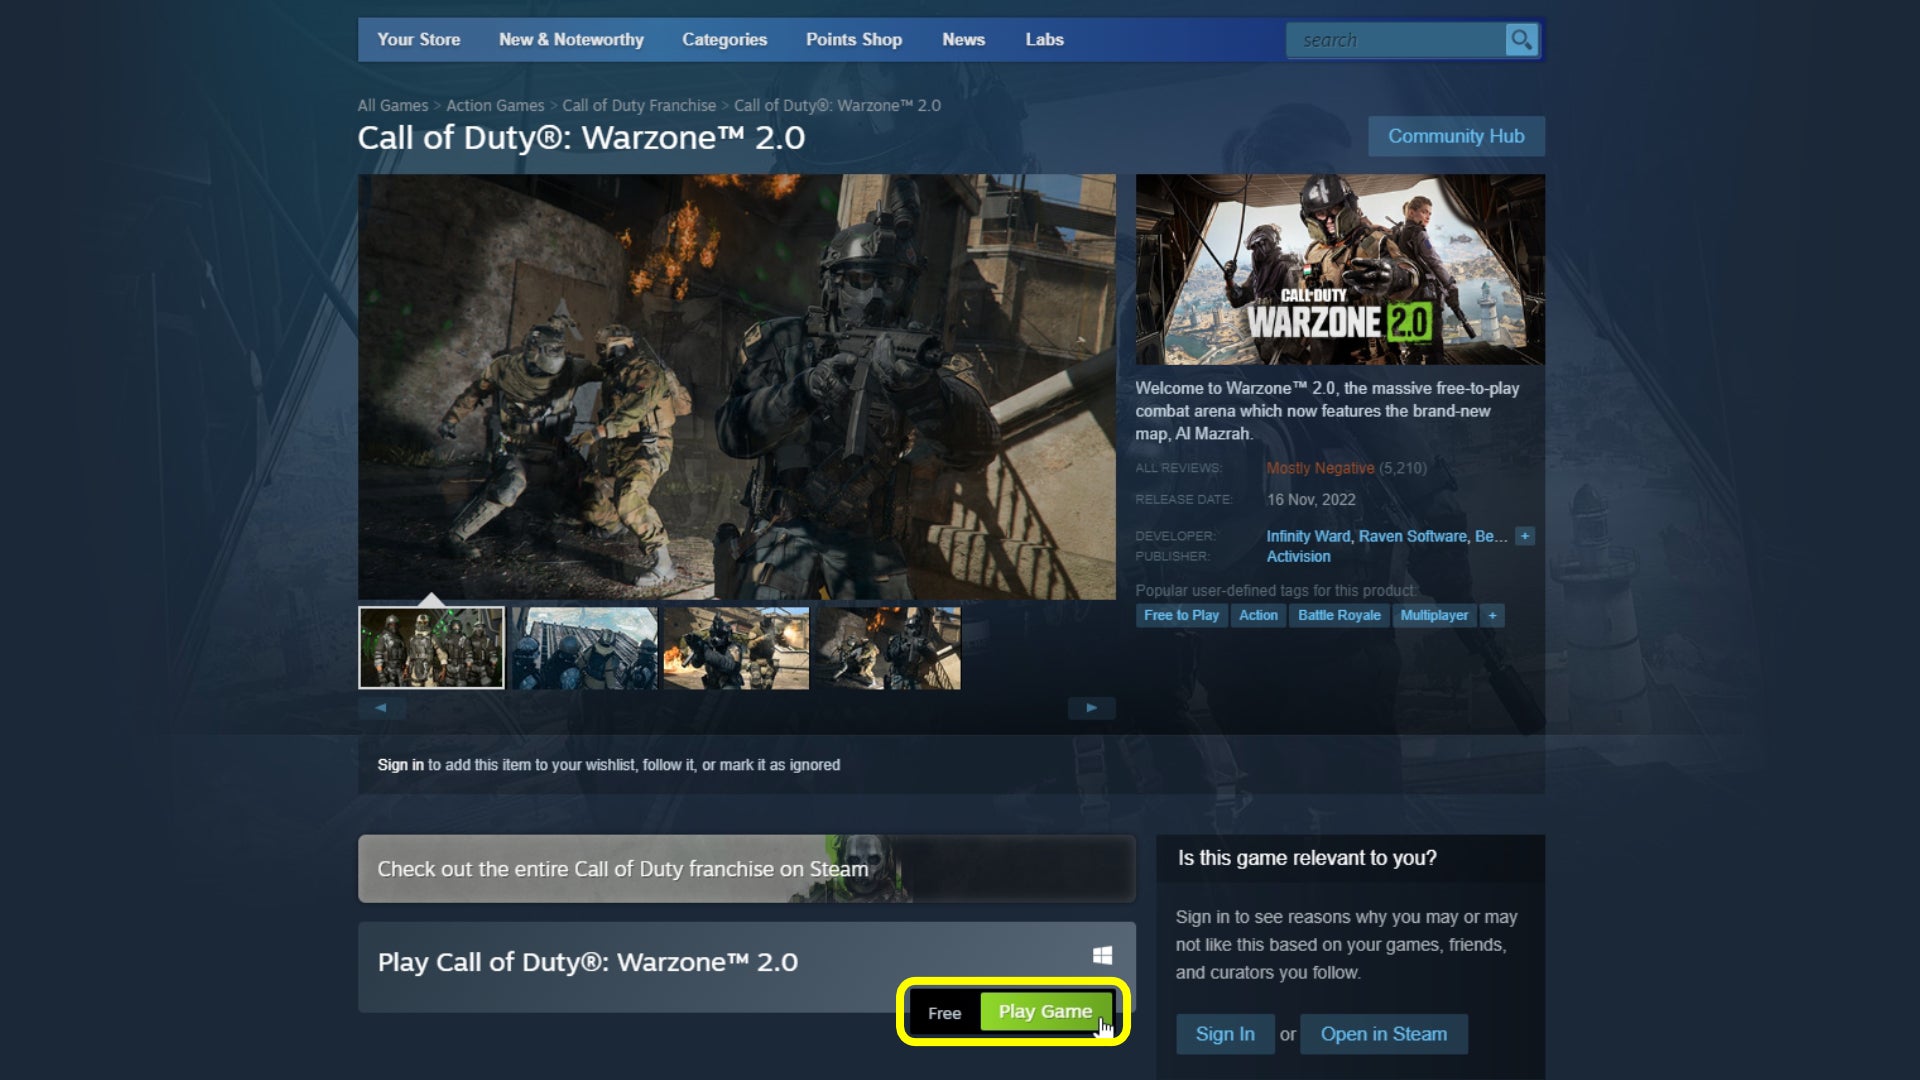 The Warzone 2 Steam page, with the Play Game button highlighted.